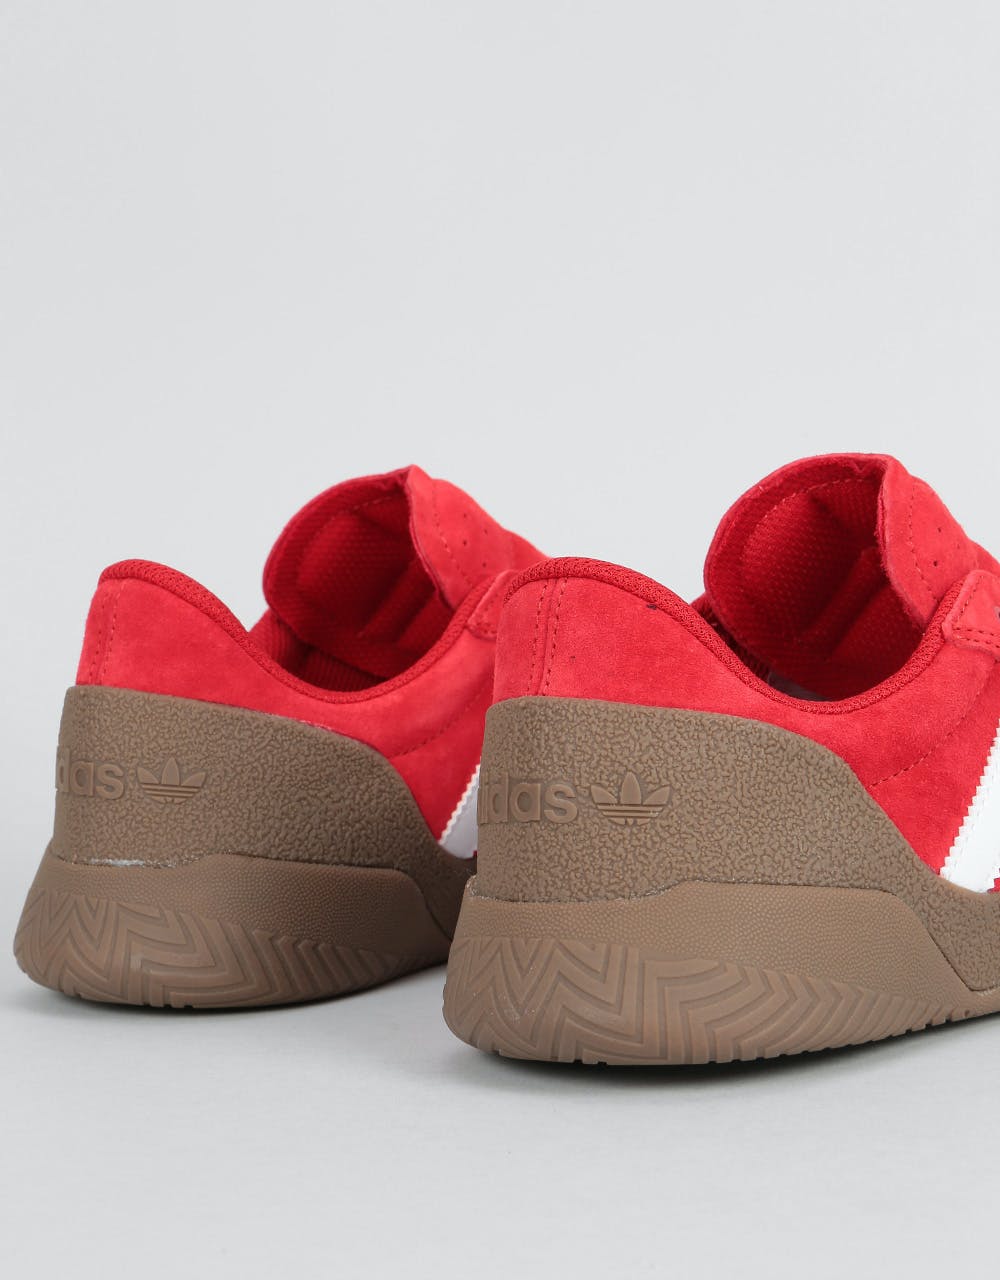 Adidas City Cup Skate Shoes - Scarlet/White/Gum